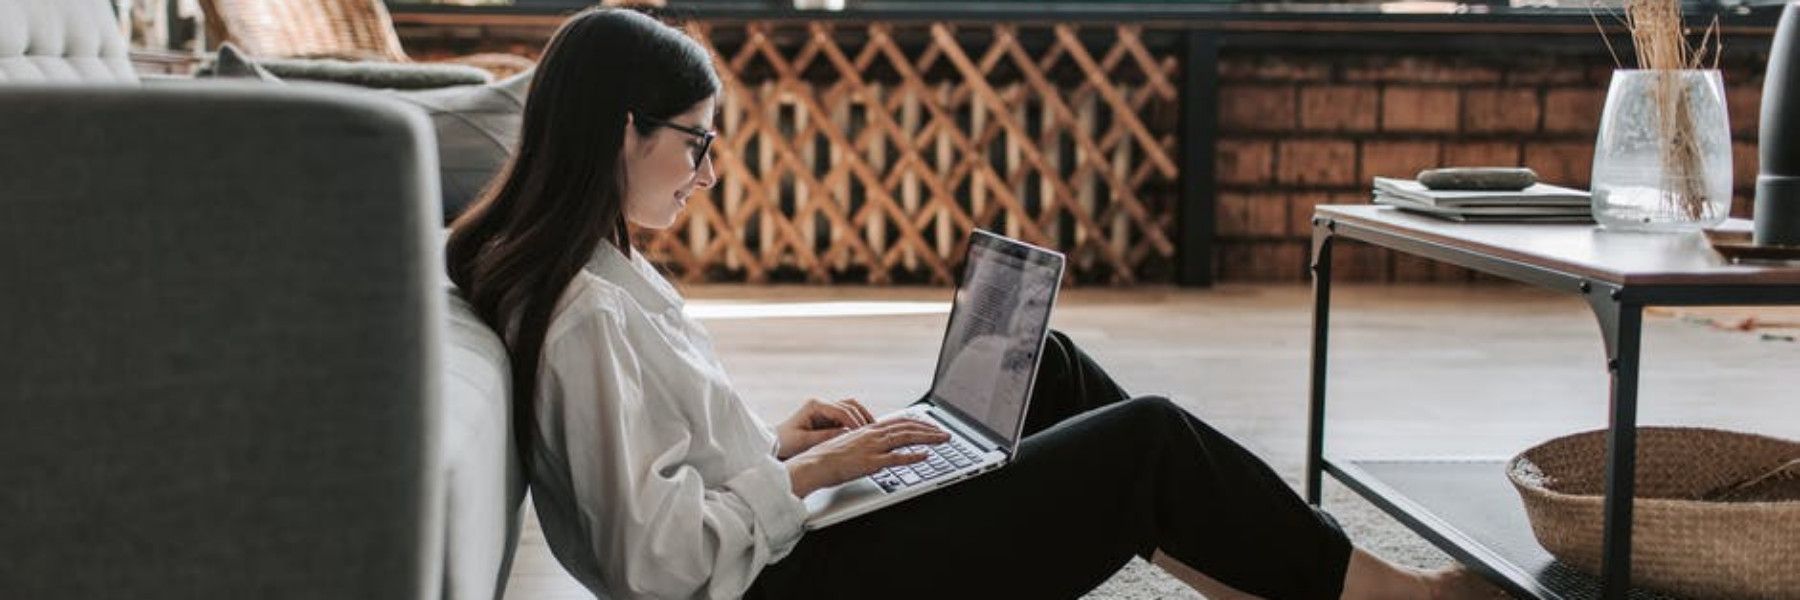 7 Common Mistakes You Do During Work From Home & How To Avoid Them